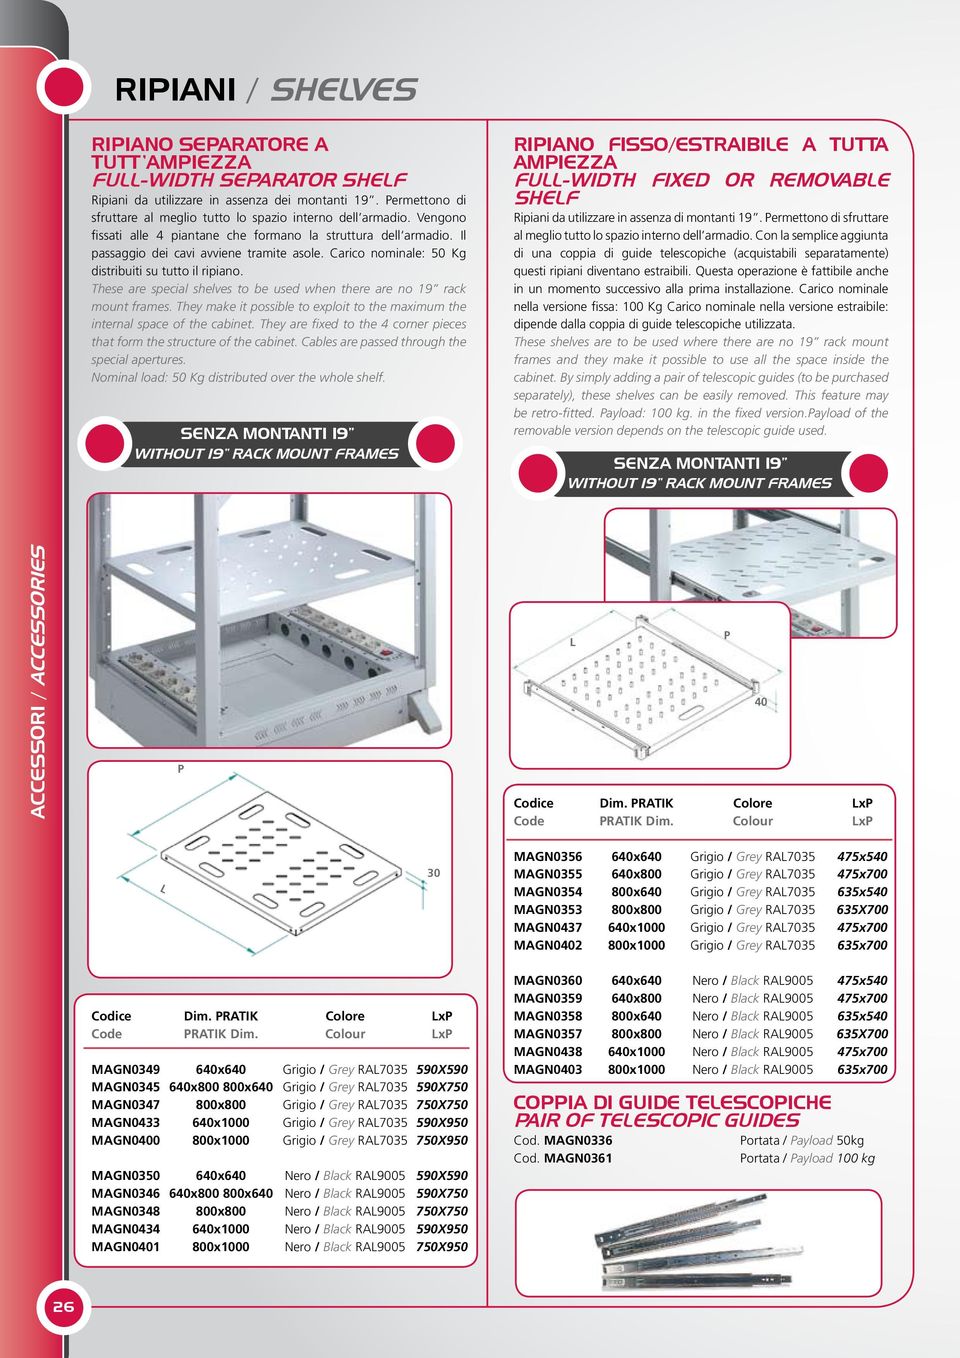 Carico nominale: 50 Kg distribuiti su tutto il ripiano. These are special shelves to be used when there are no 19 rack mount frames.